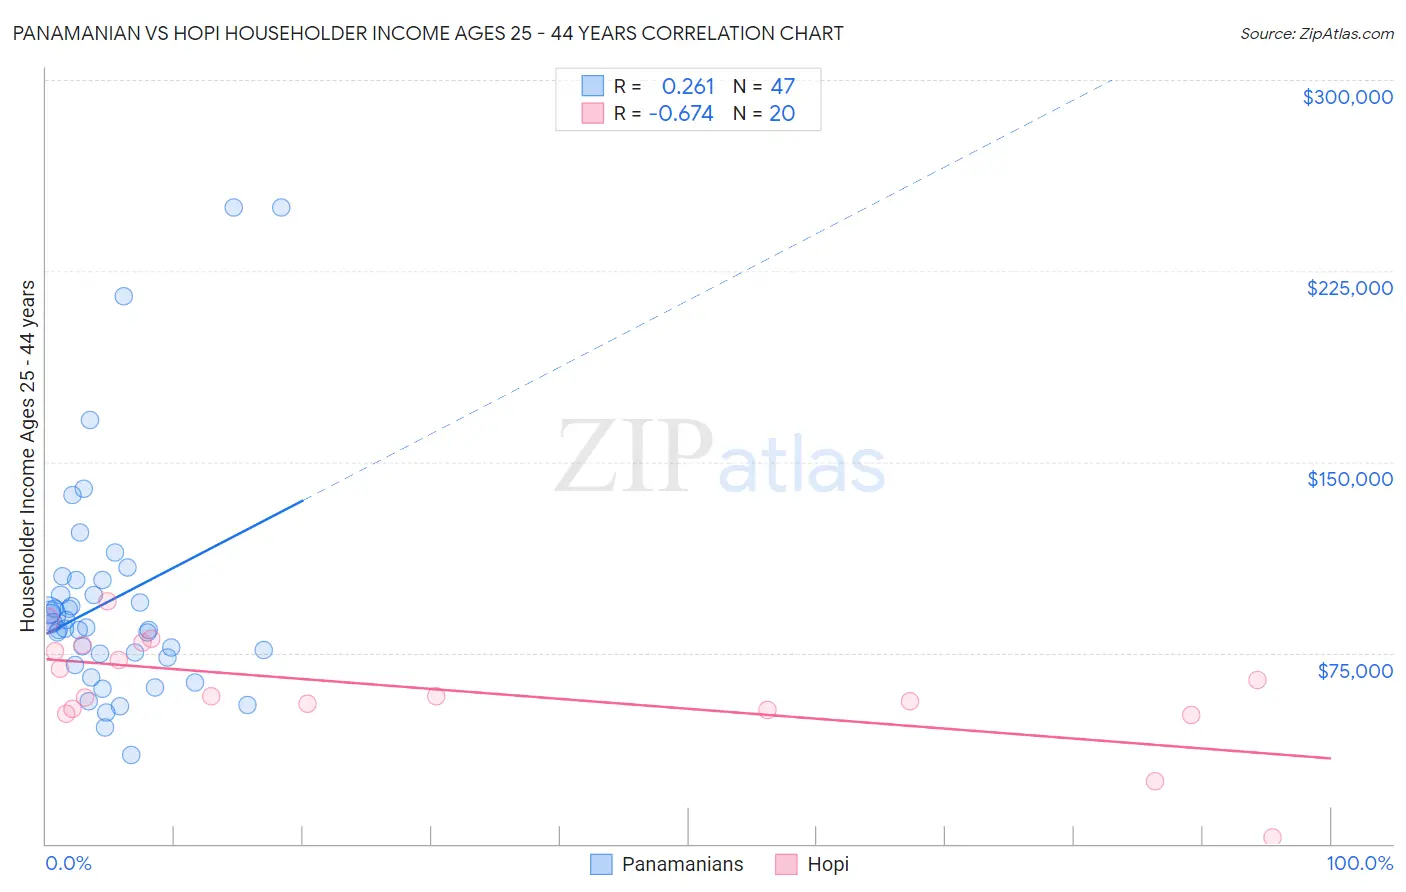 Panamanian vs Hopi Householder Income Ages 25 - 44 years